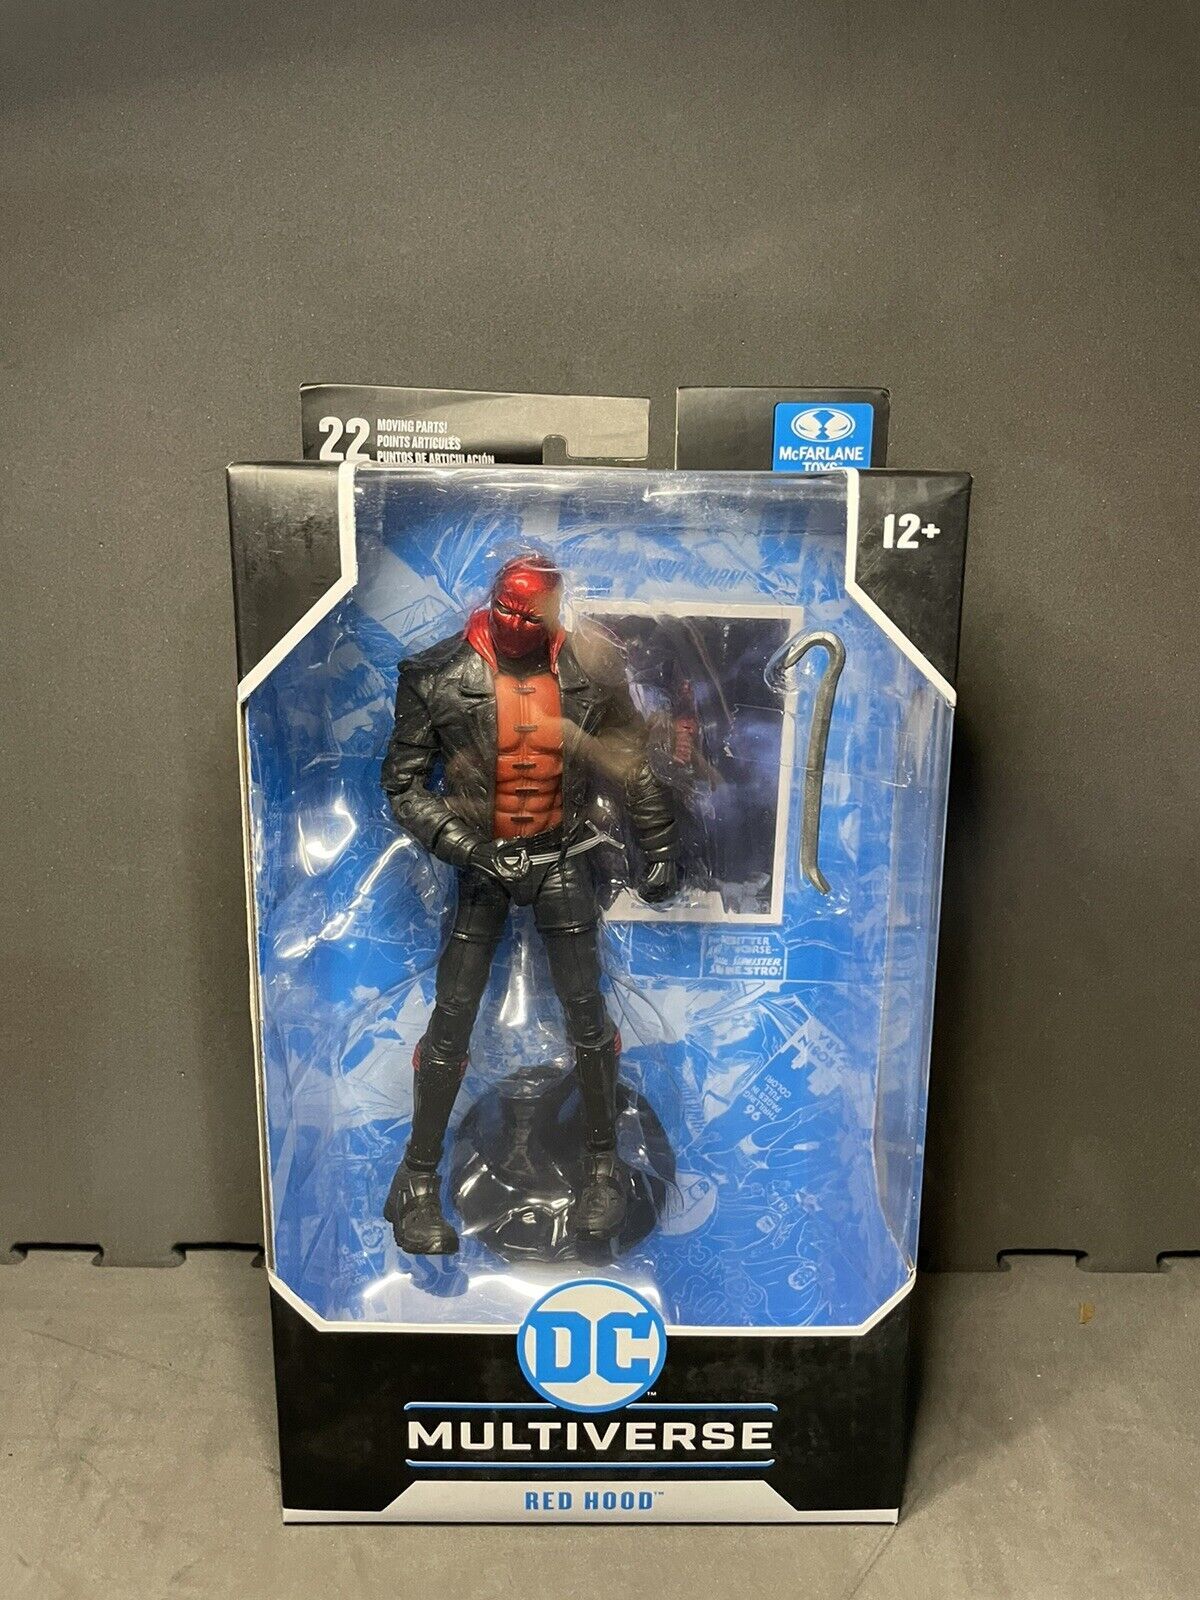 Primary image for McFarlane Action Figure -DC Multiverse - RED HOOD (7 inch)(Batman: Three Jokers)